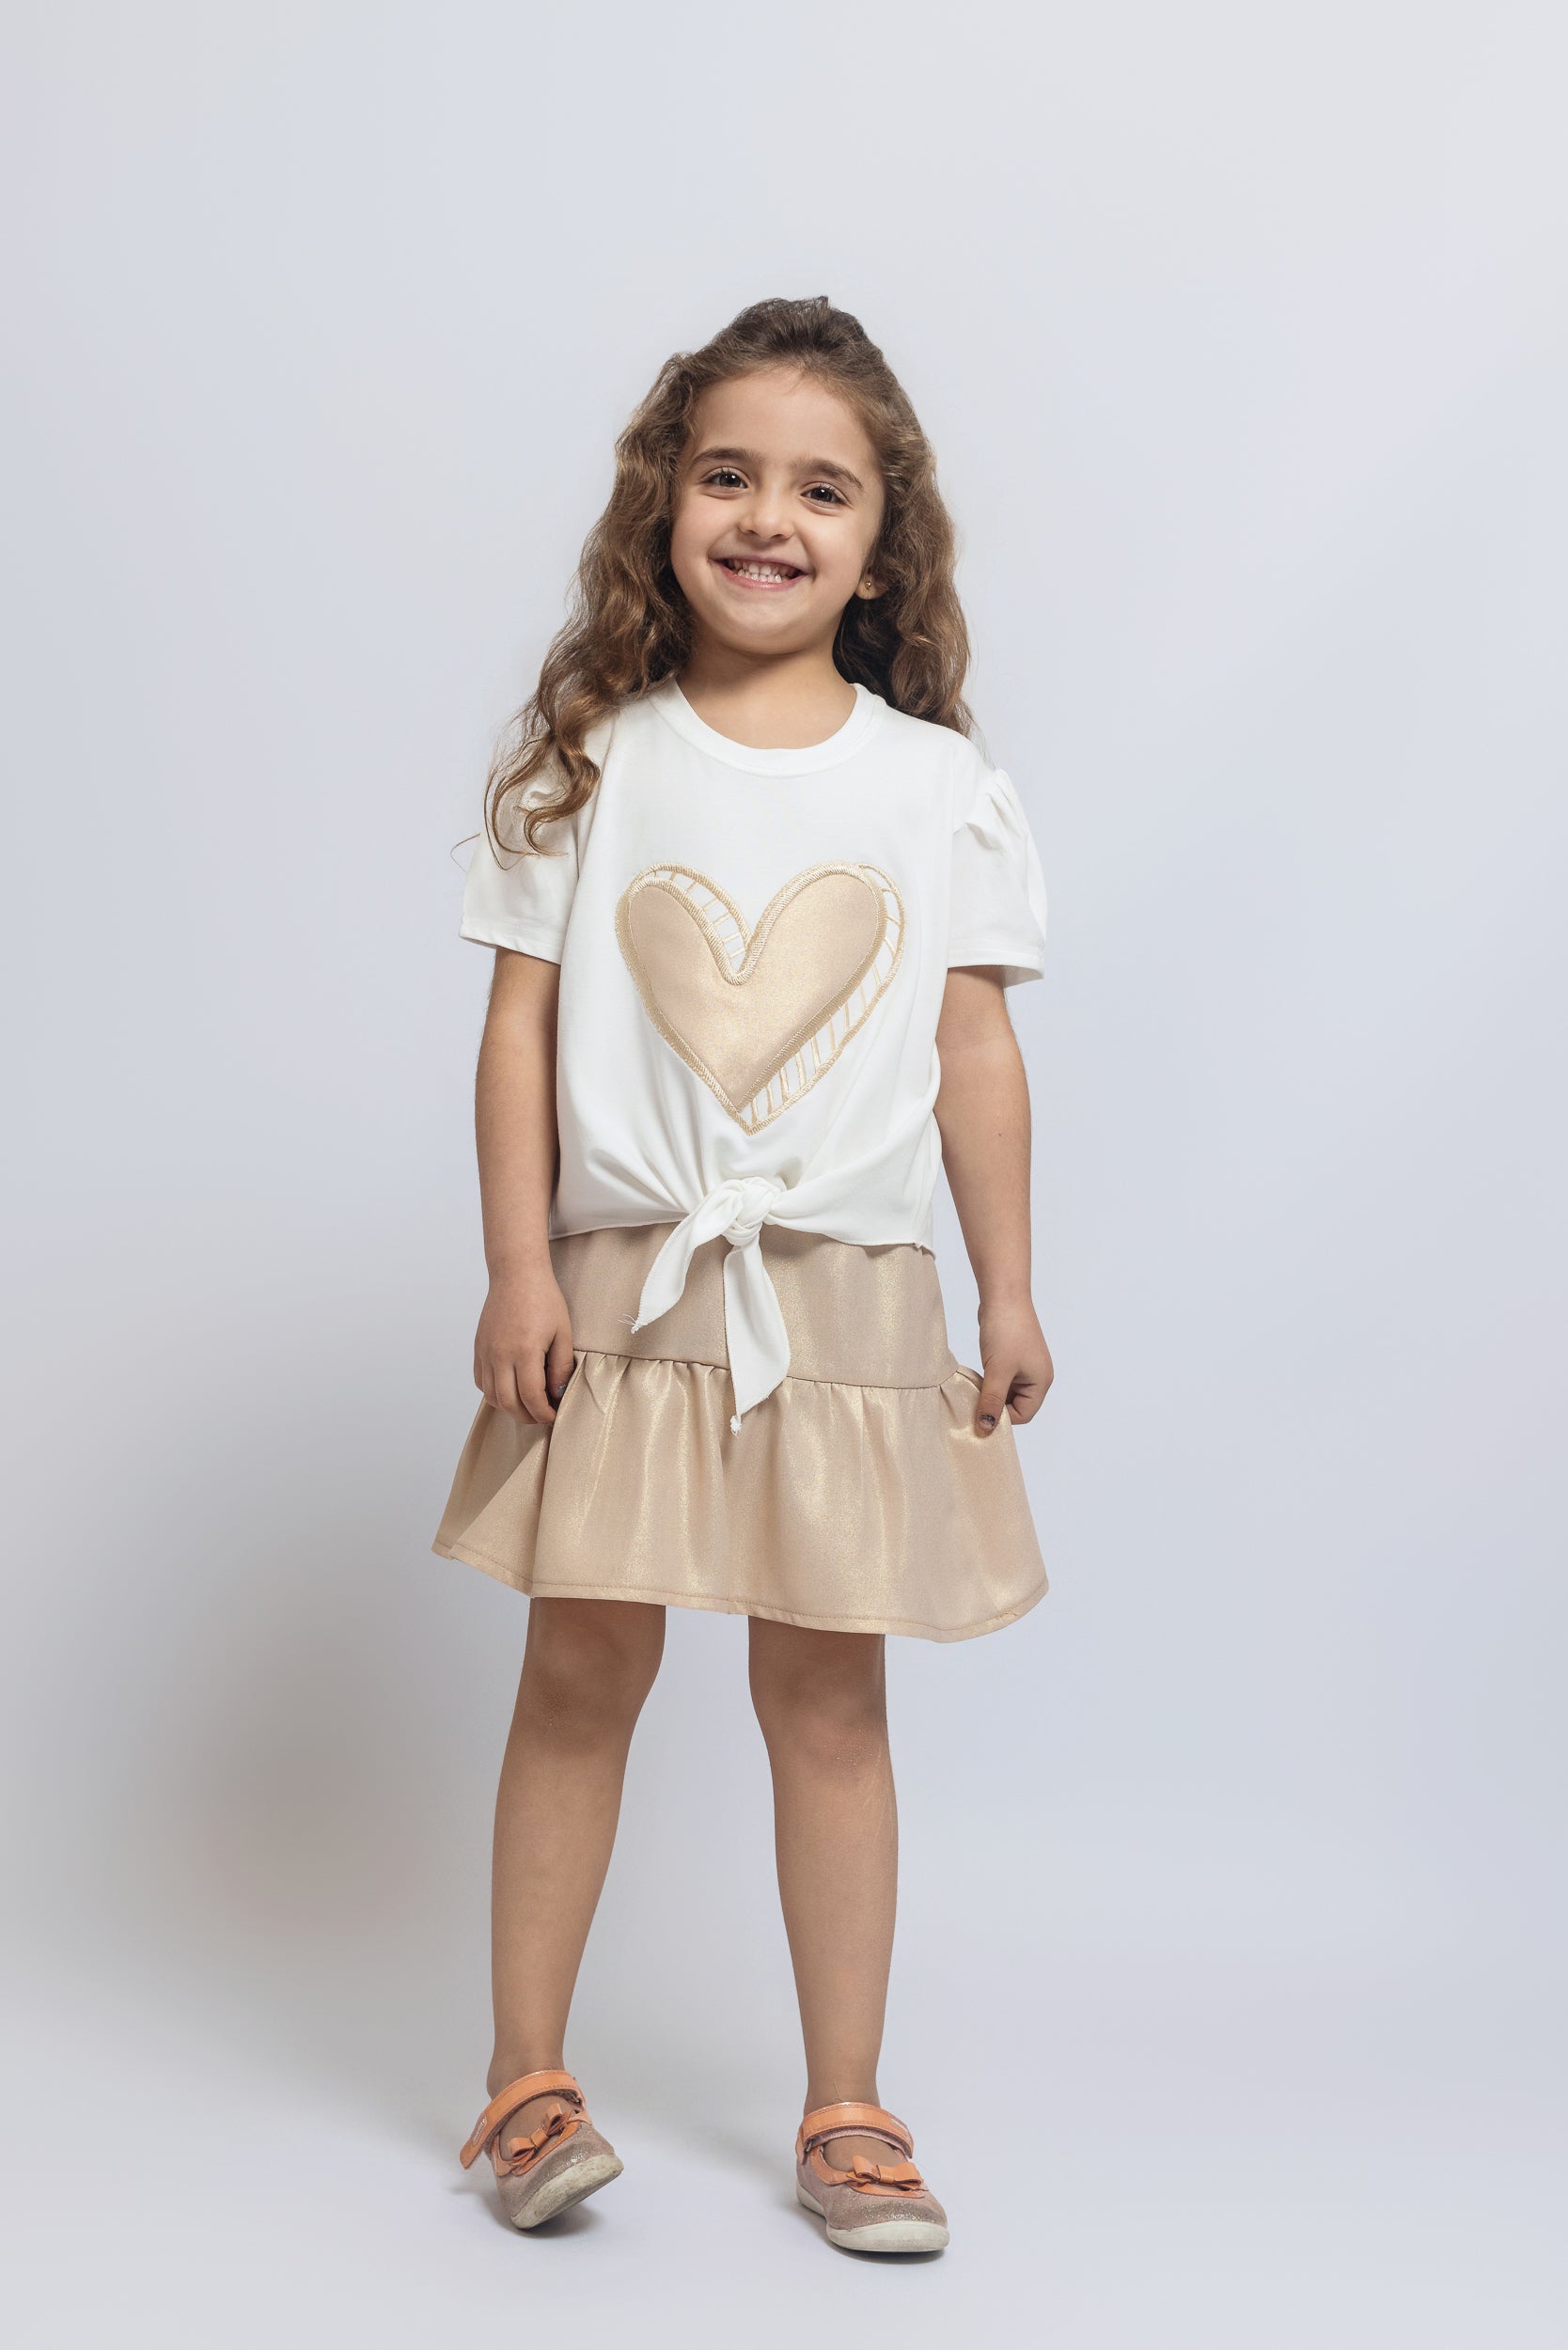 Shiny Heart Top For Girls - Off White